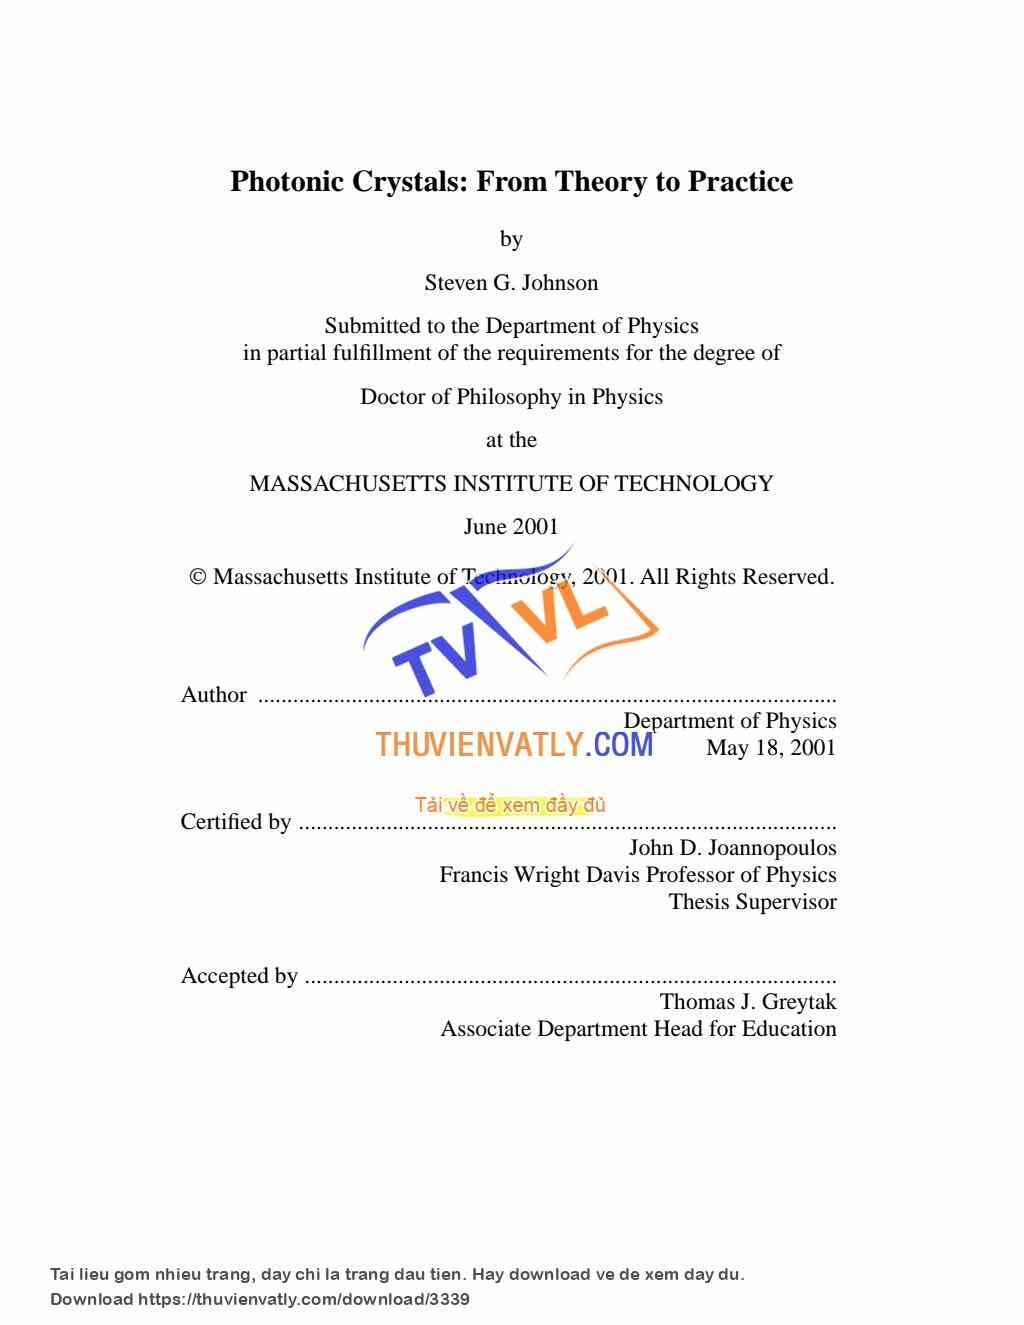 Photonic Crystals: From Theory to Practice